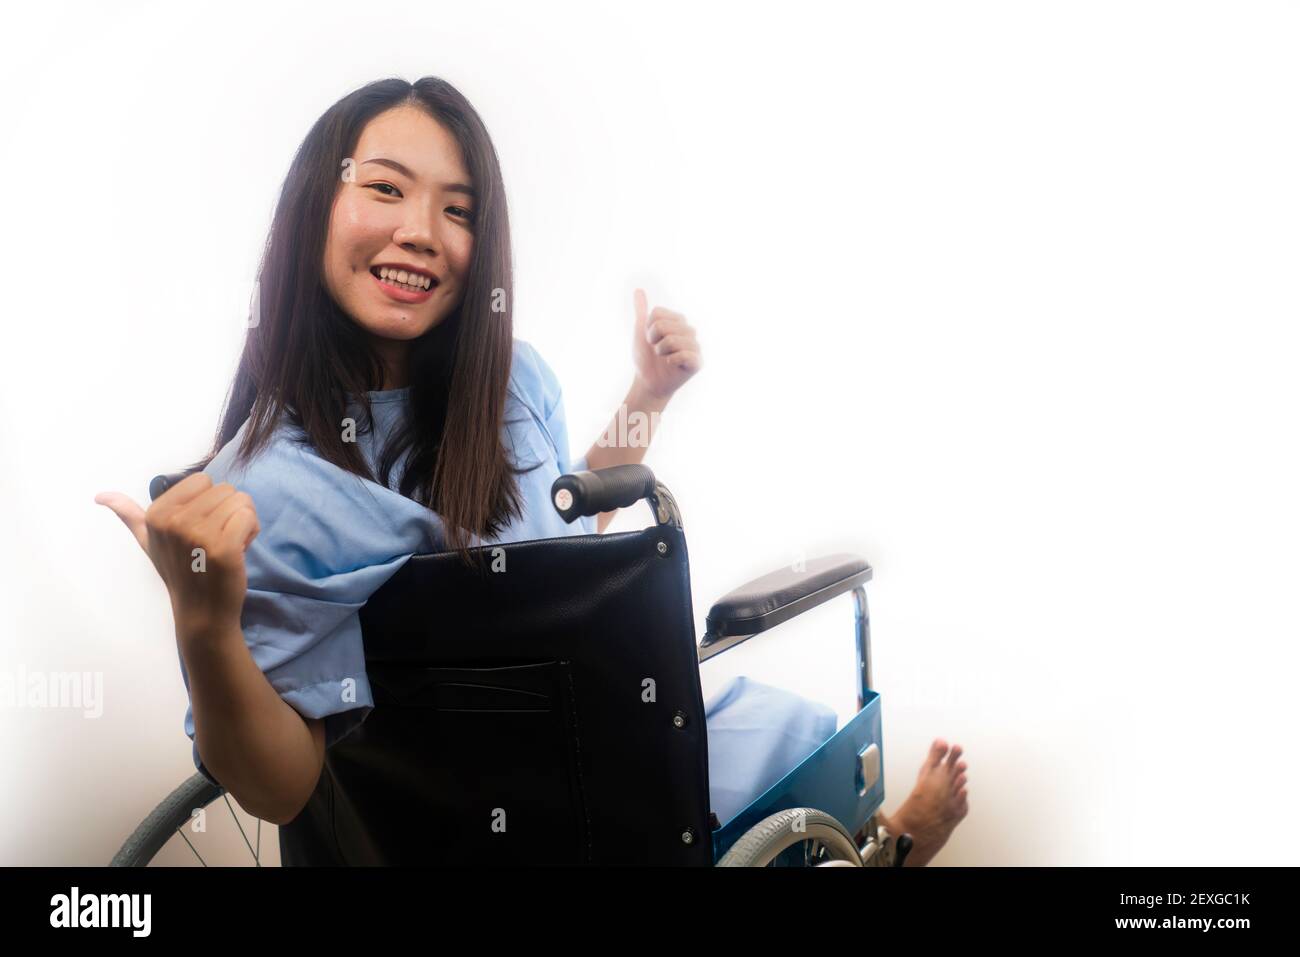 Portrait Of Young Happy And Positive Asian Chinese Woman In Hospital Gown Sitting On Wheelchair 3763